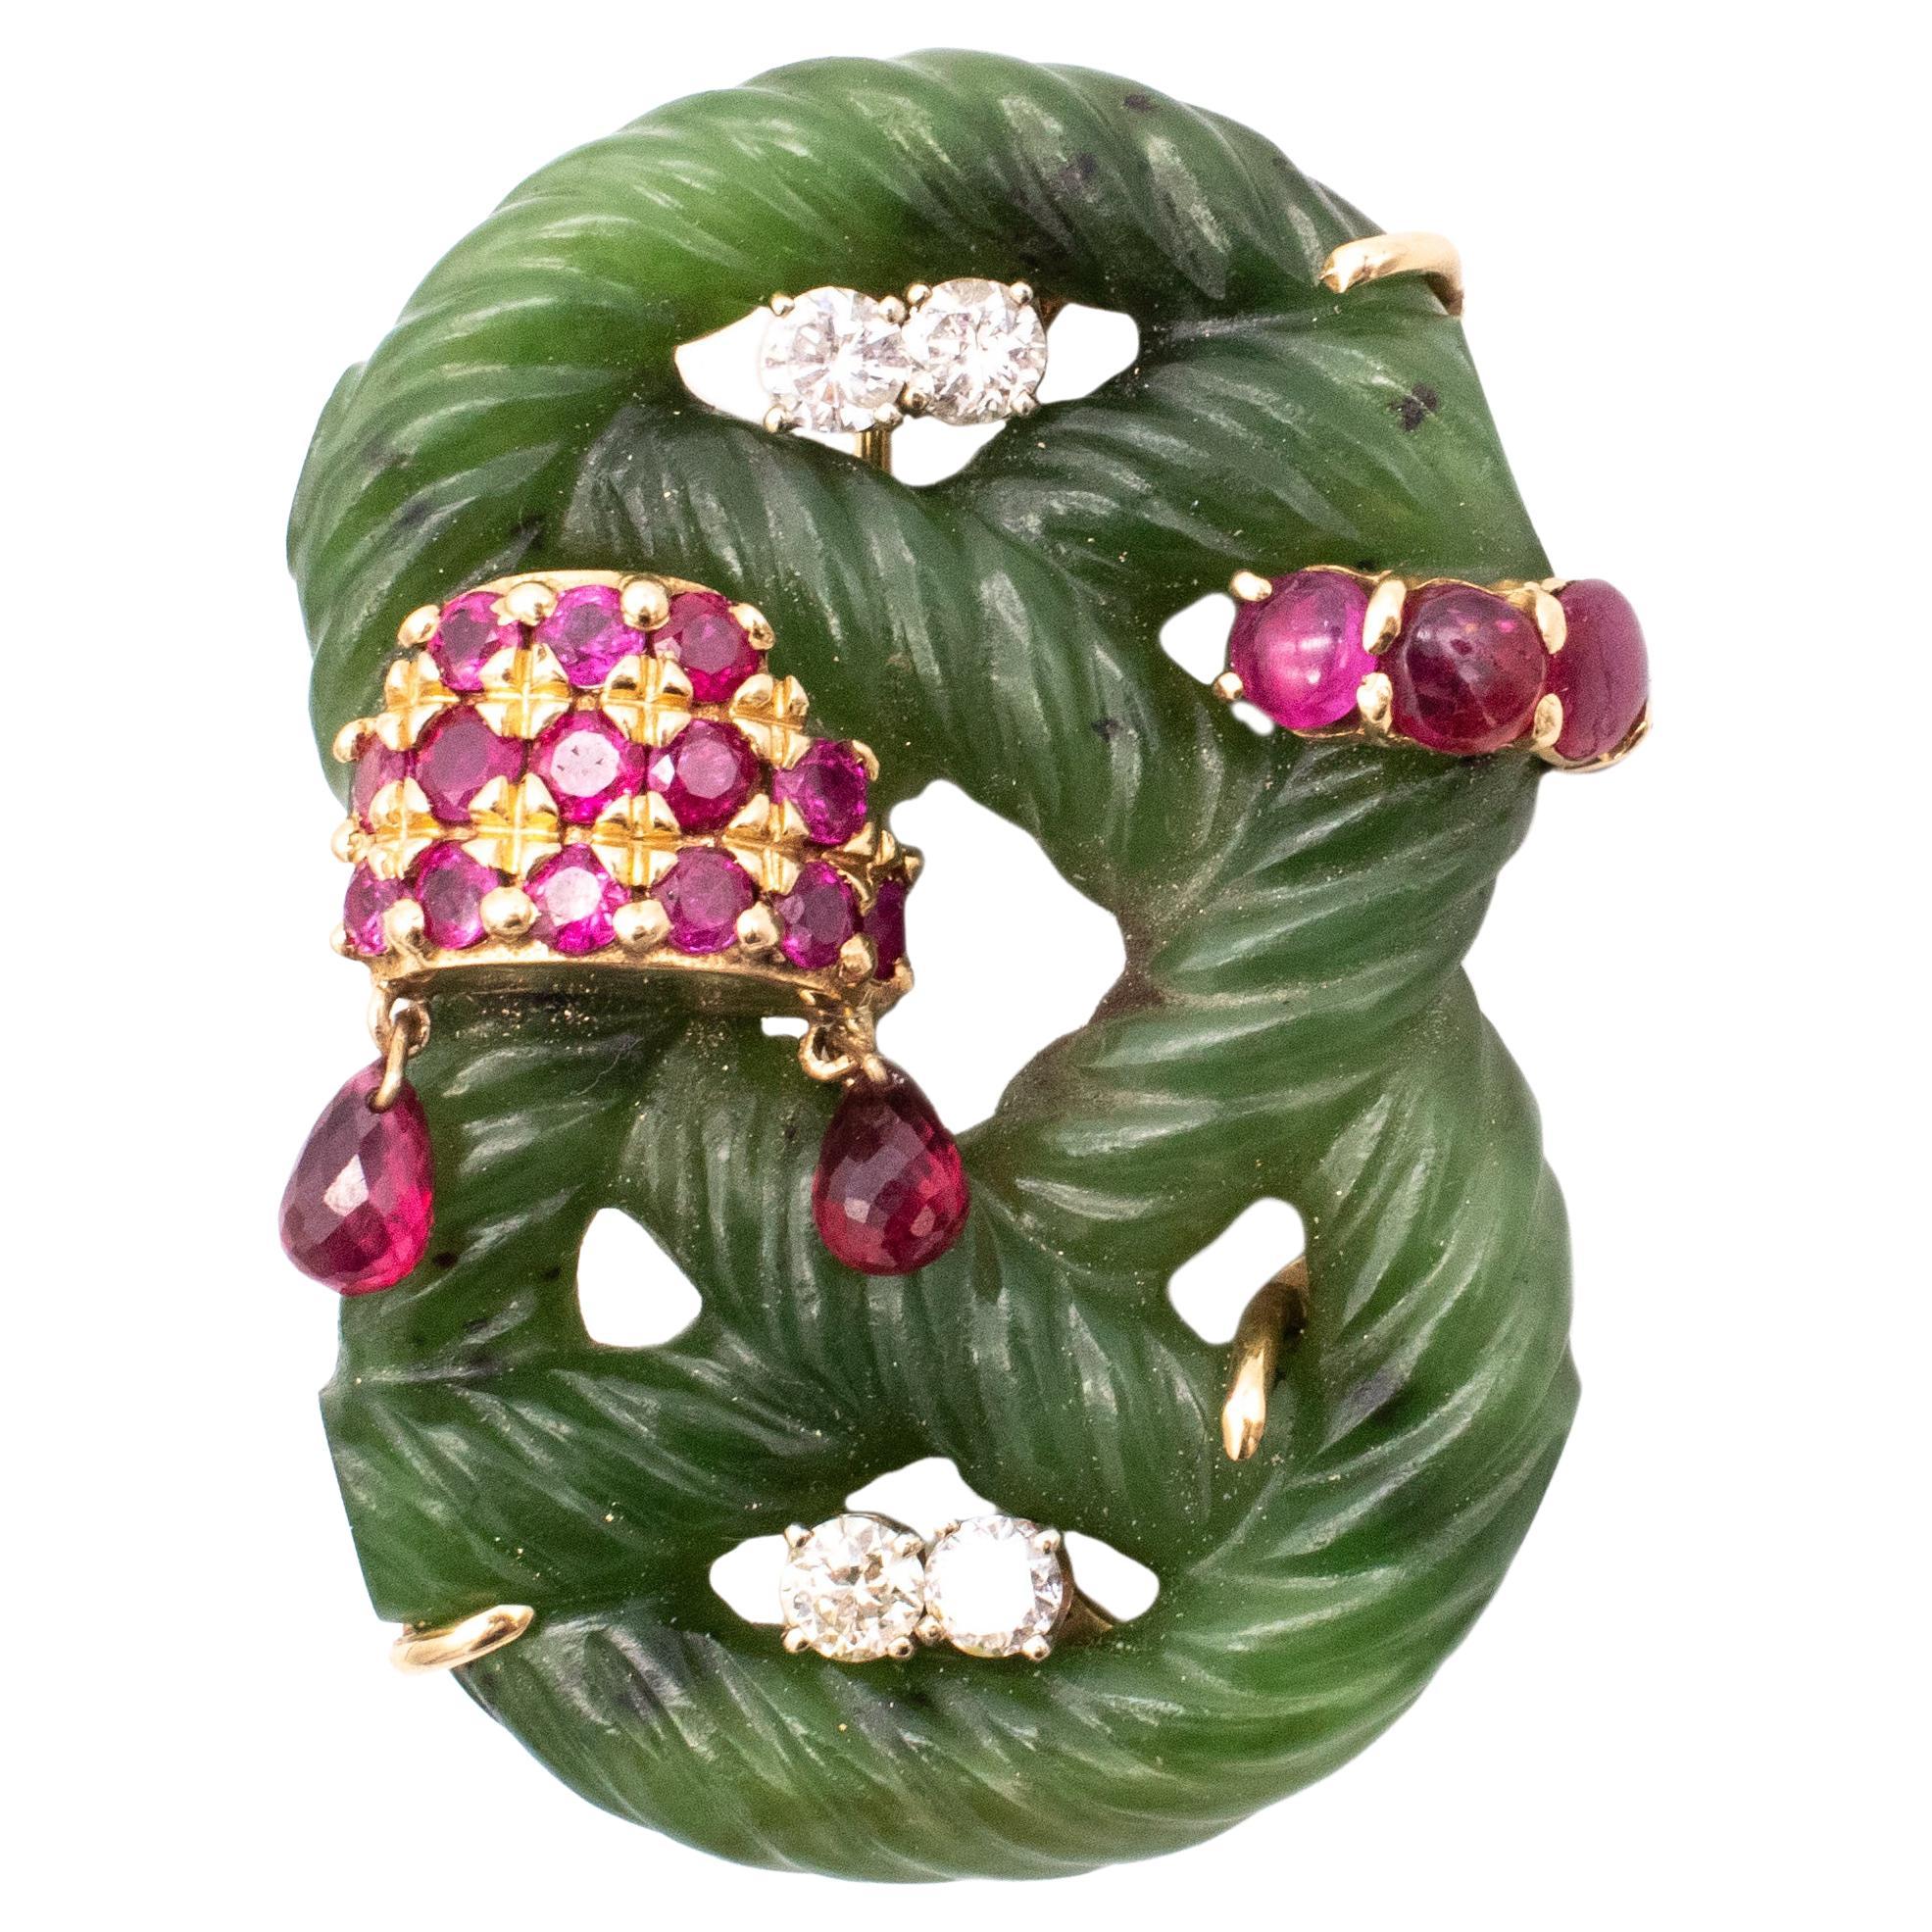 Seaman Schepps 1950 Brooch in 14Kt with Nephrite and 4.20 Ctw in Diamonds Rubies